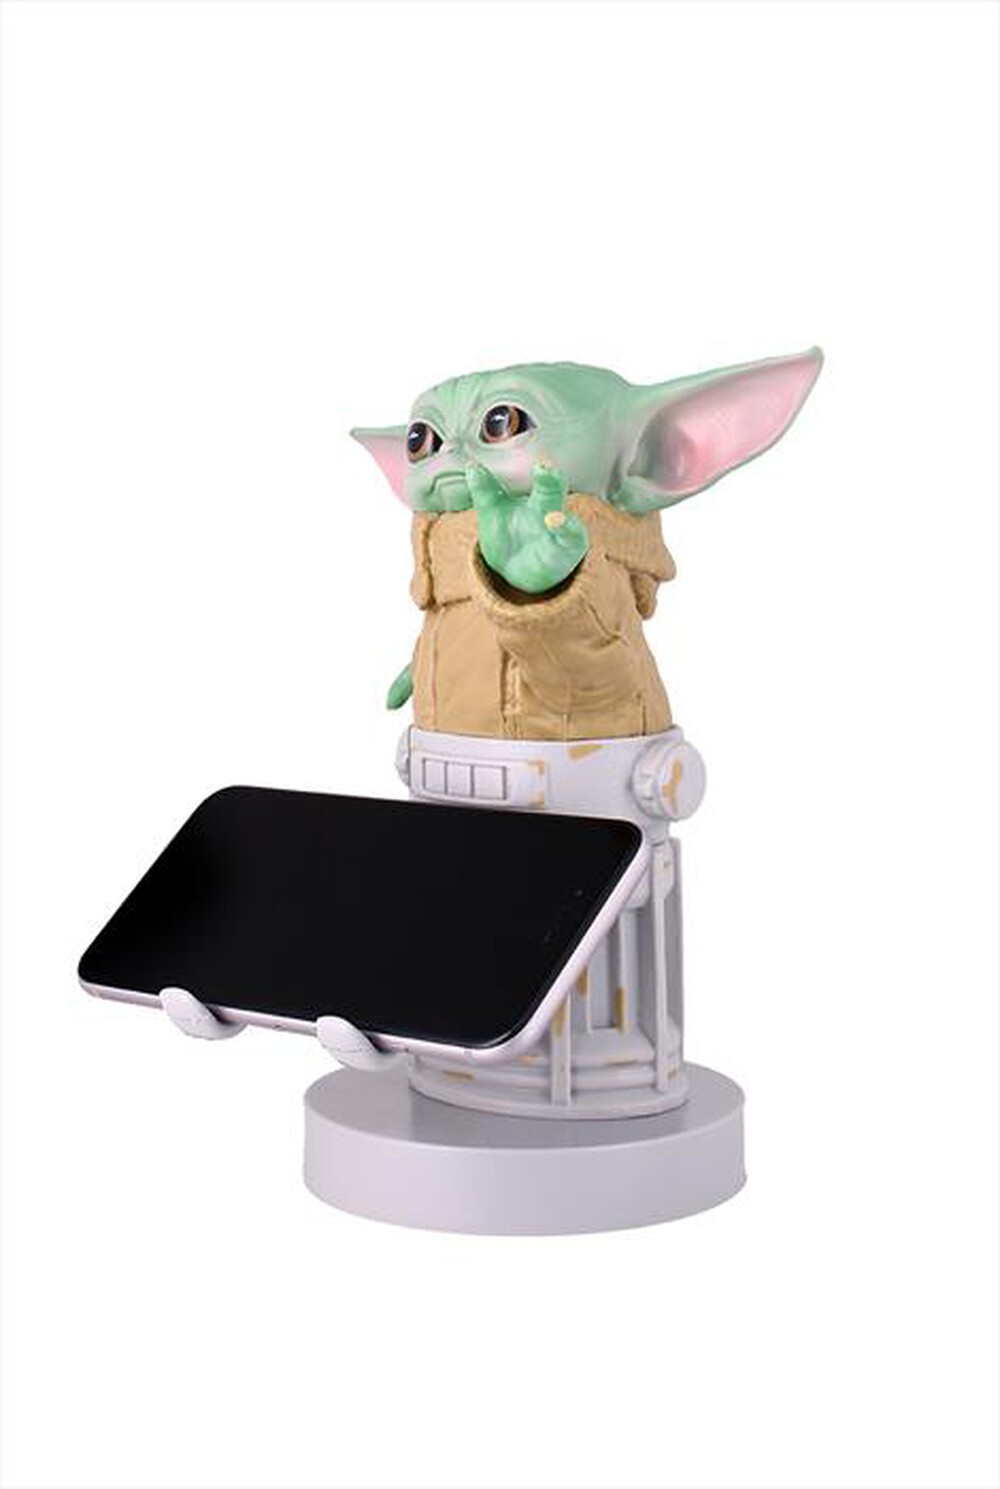 "EXQUISITE GAMING - THE CHILD - BABY YODA CABLE GUY"